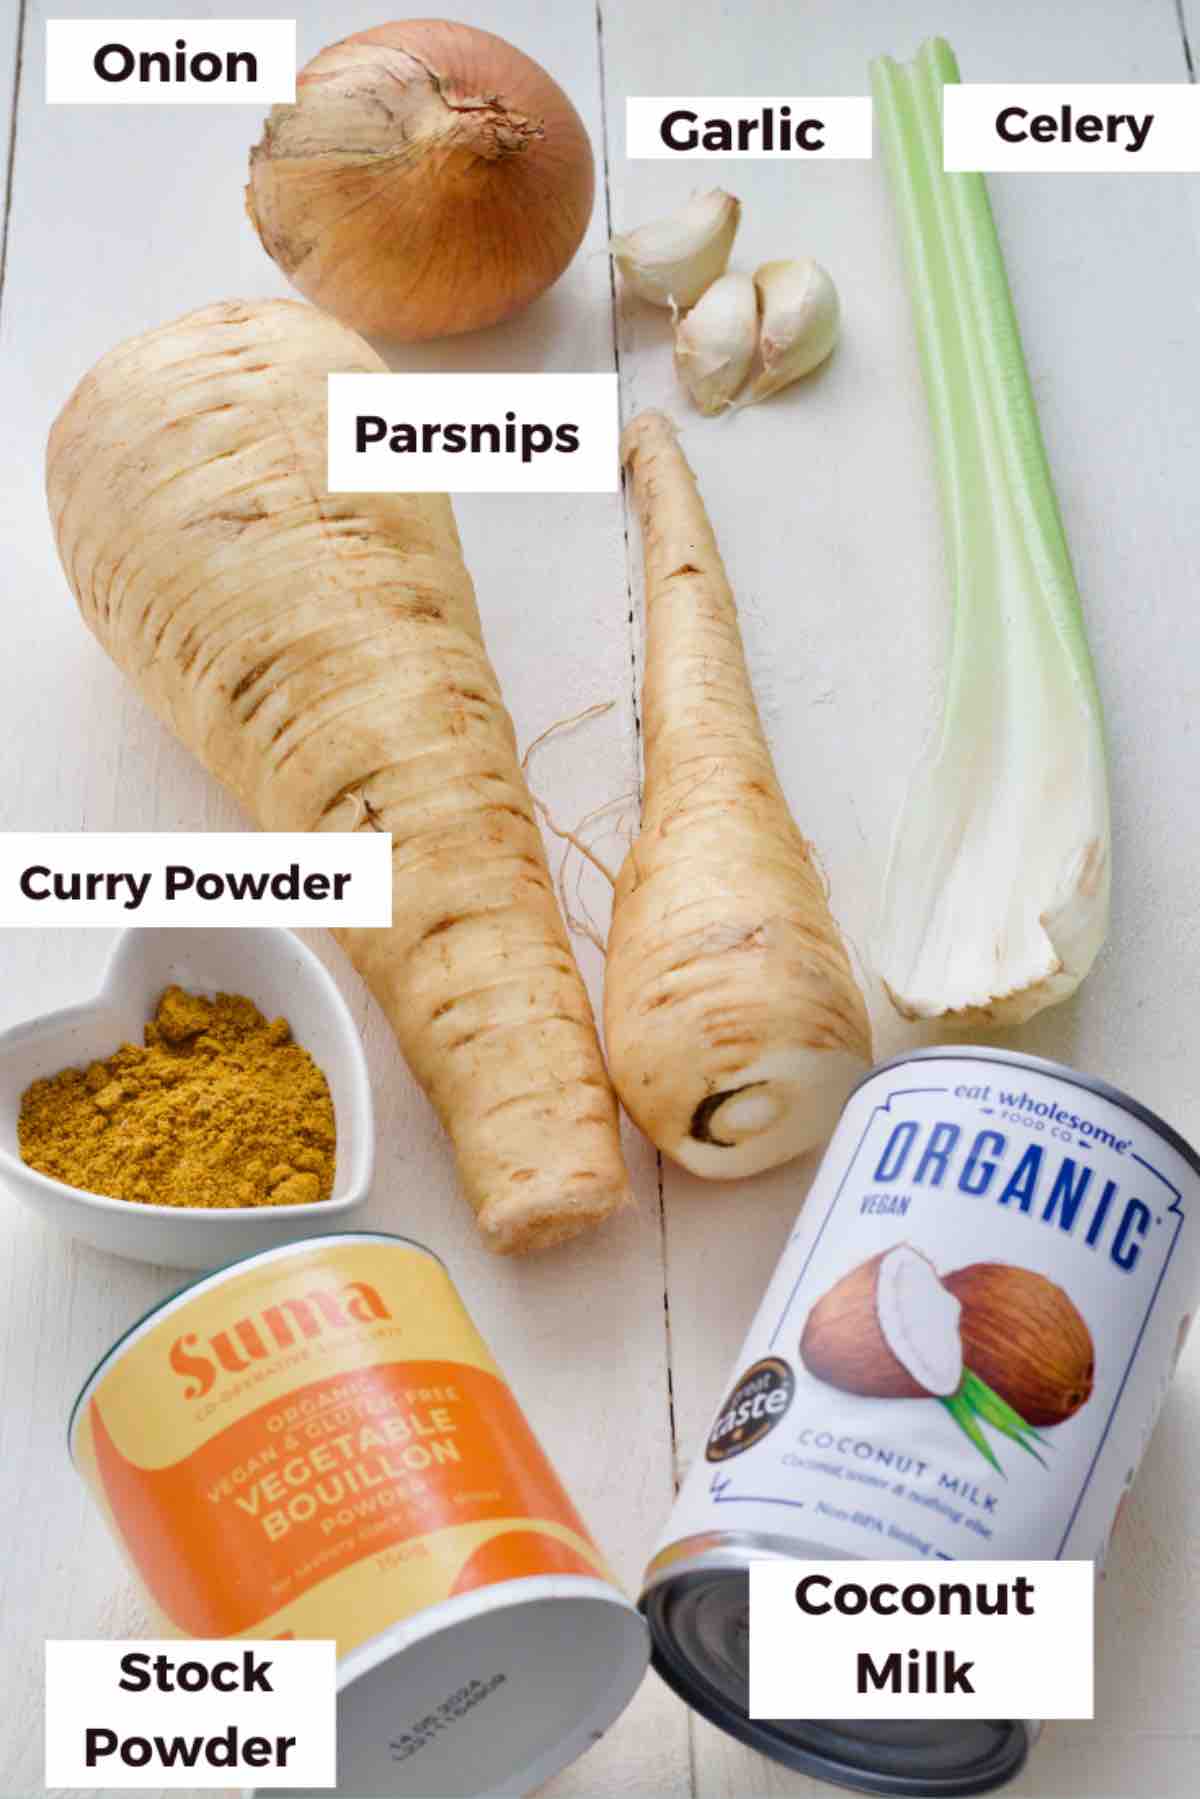 Ingredients for making curried parsnip soup.